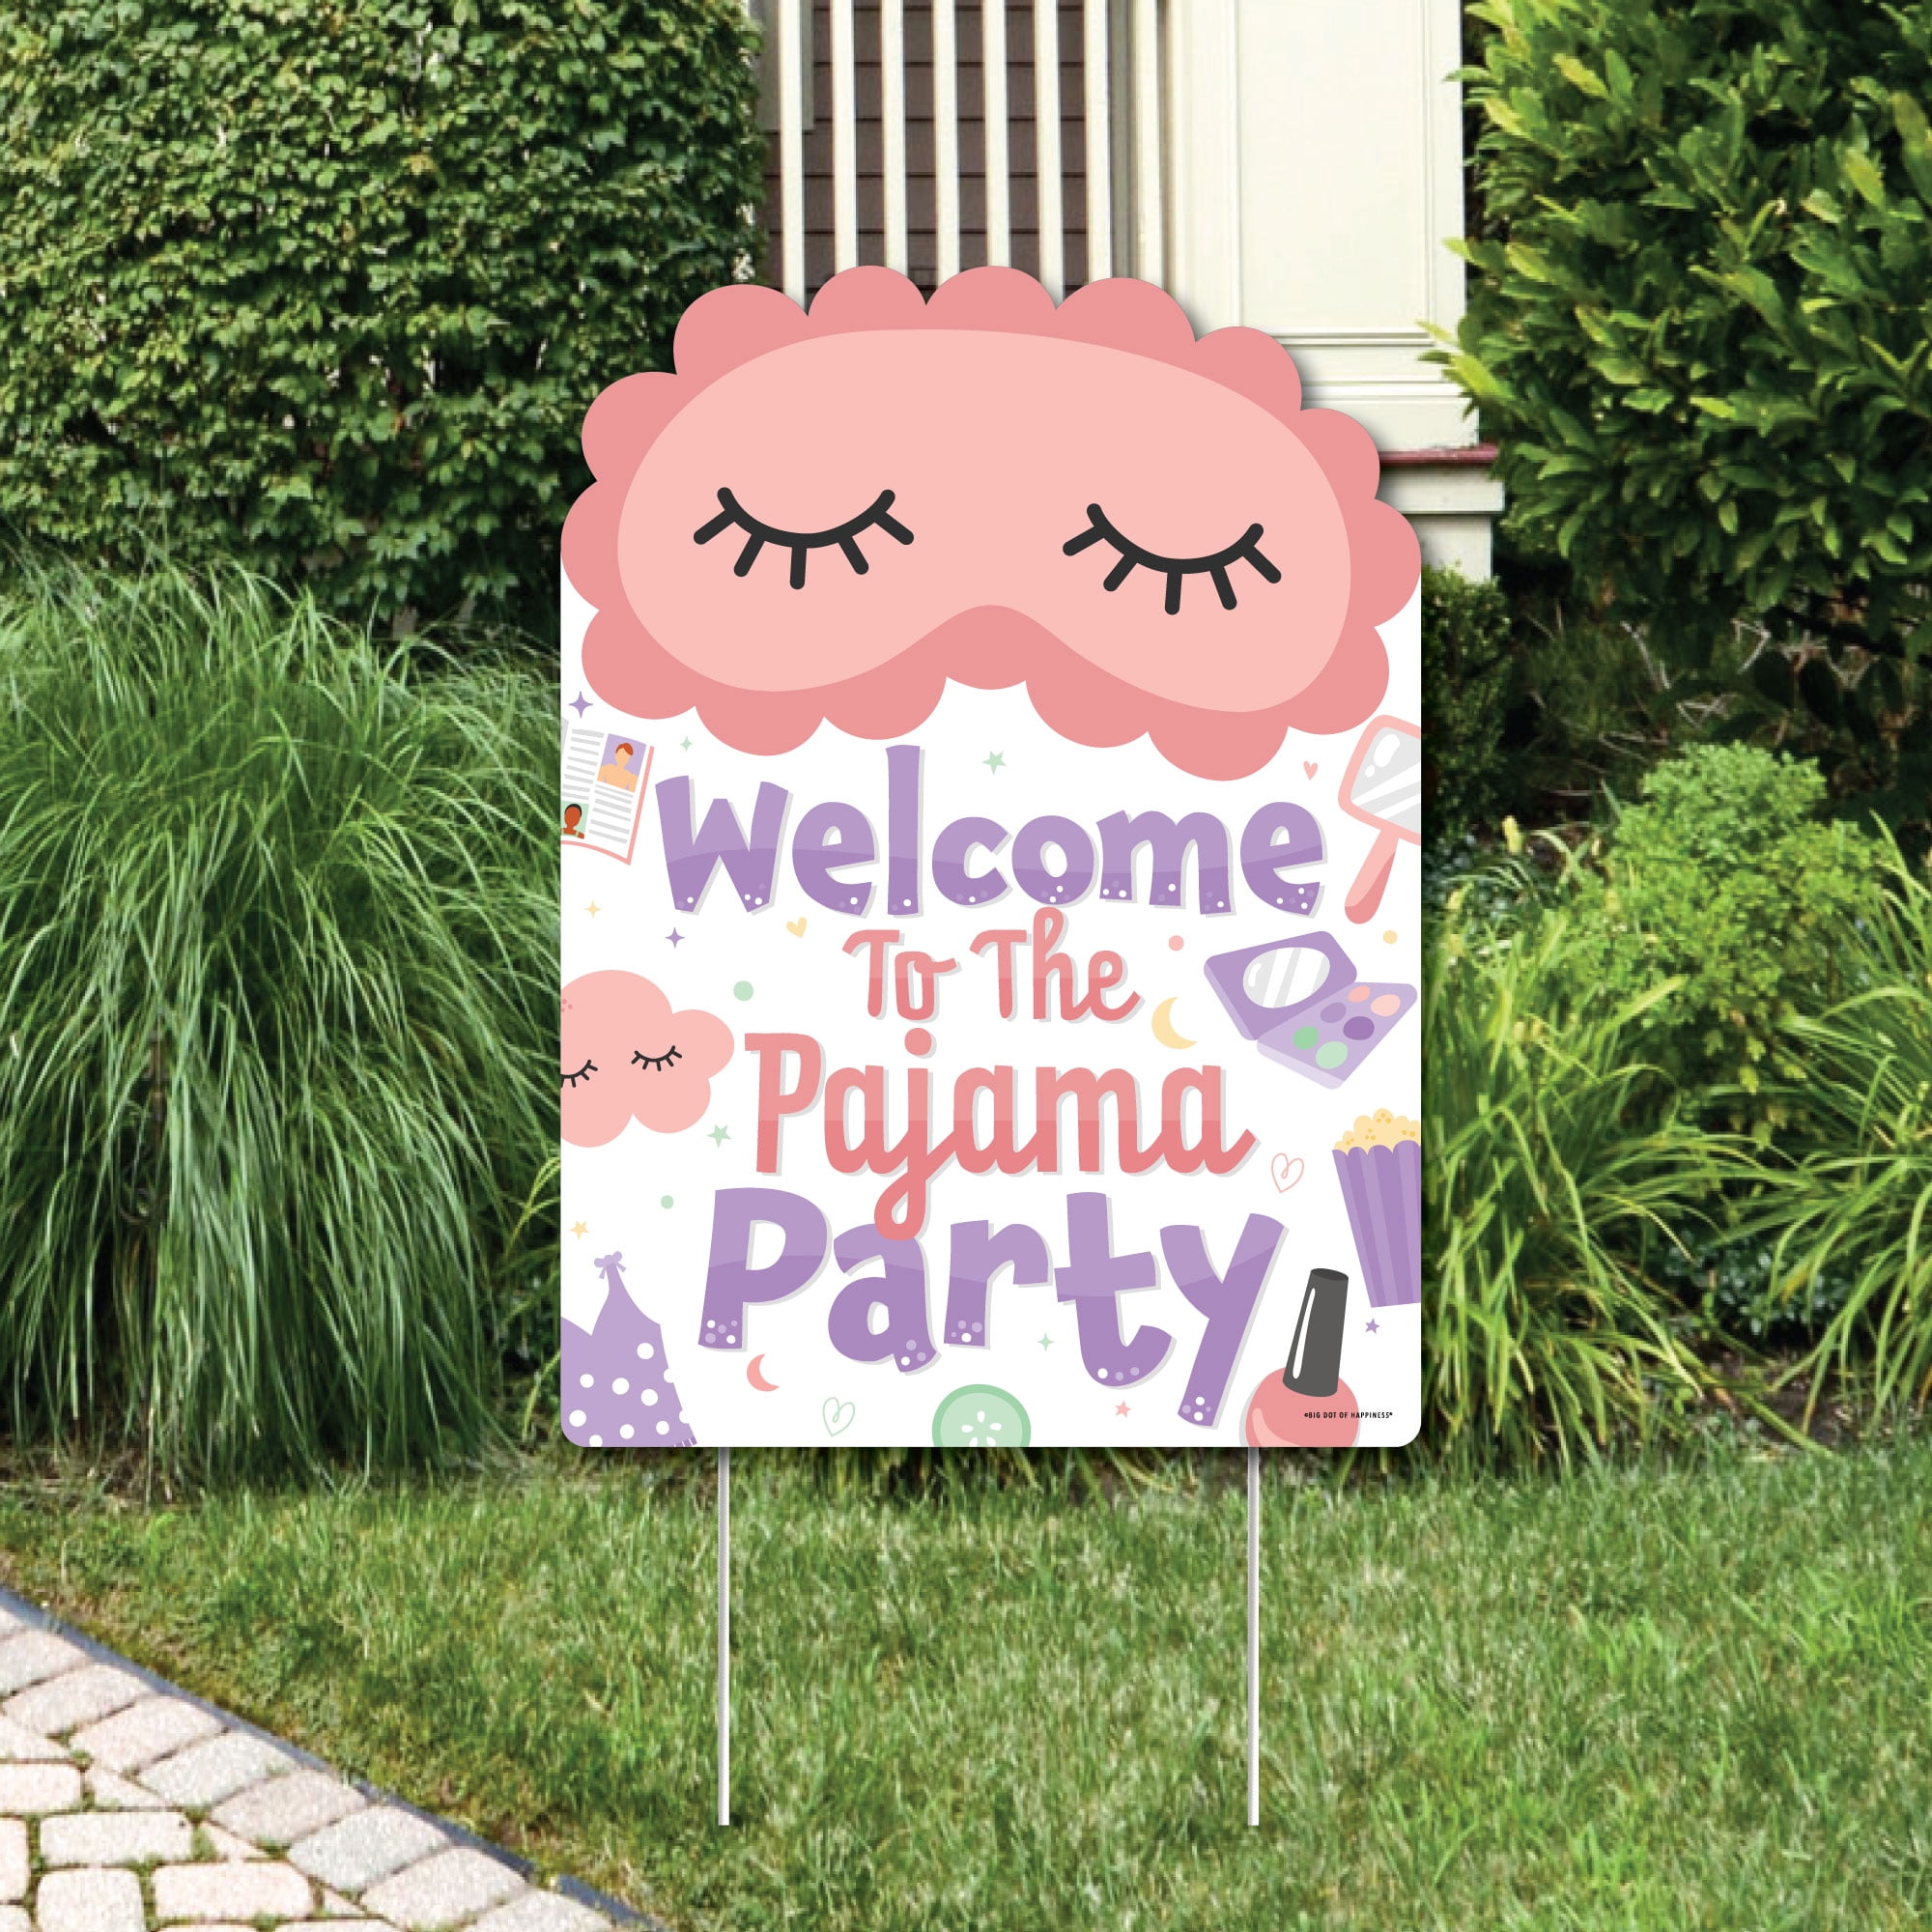 Pajama Party Balloons Banner Rose Gold Sleepover Pajama Party Decorations  Slumber Theme Birthday Party Supplies for Girls